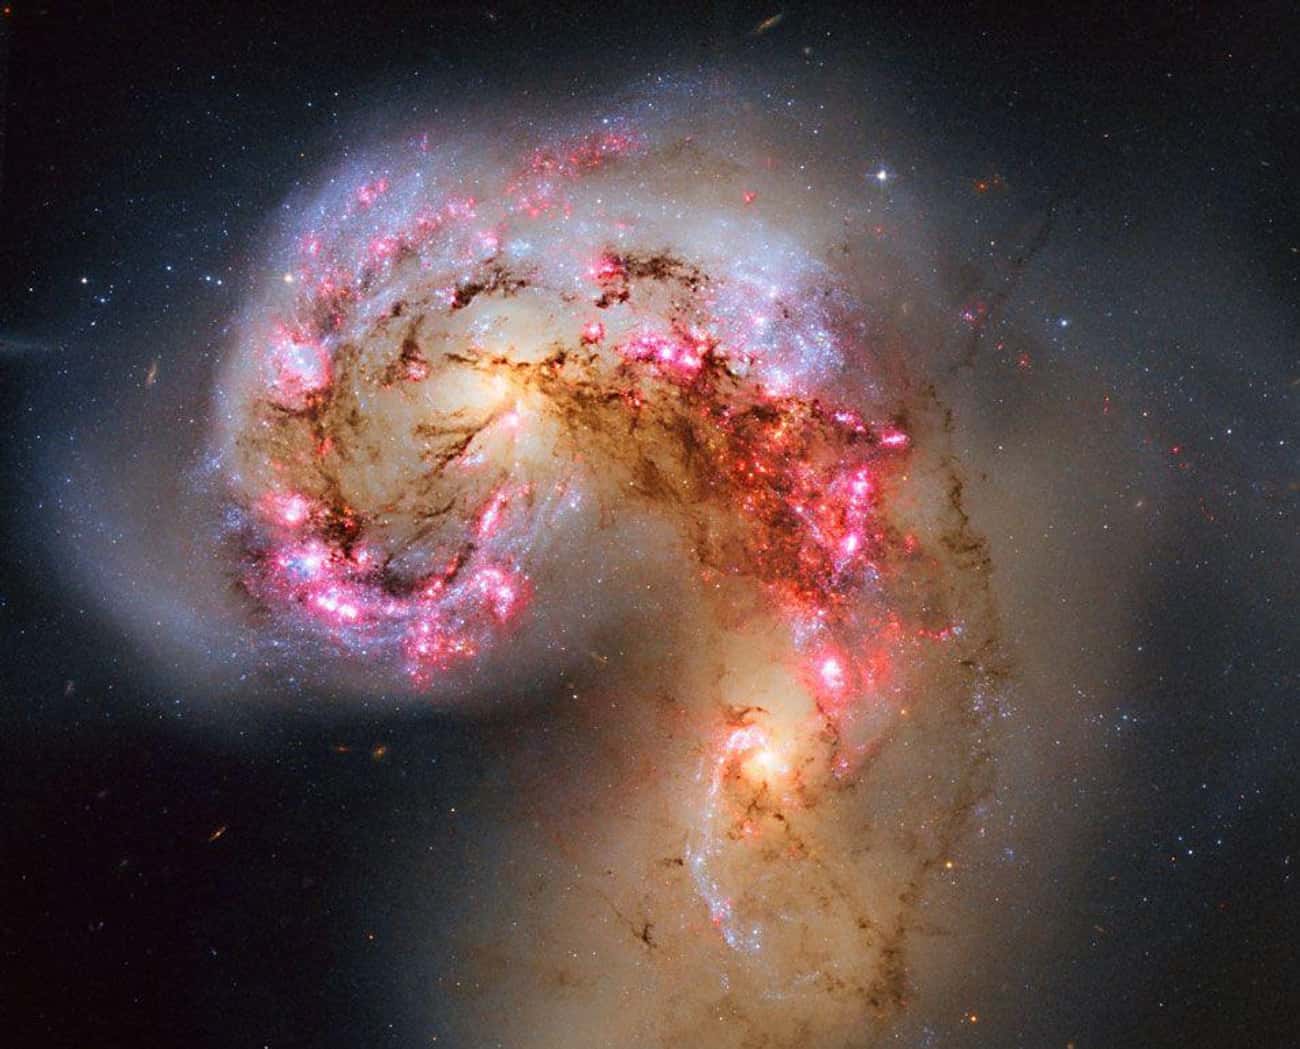 Two Large Galaxies, Known As The Antennae, Are Colliding And Triggering Super Star Cluster Formations